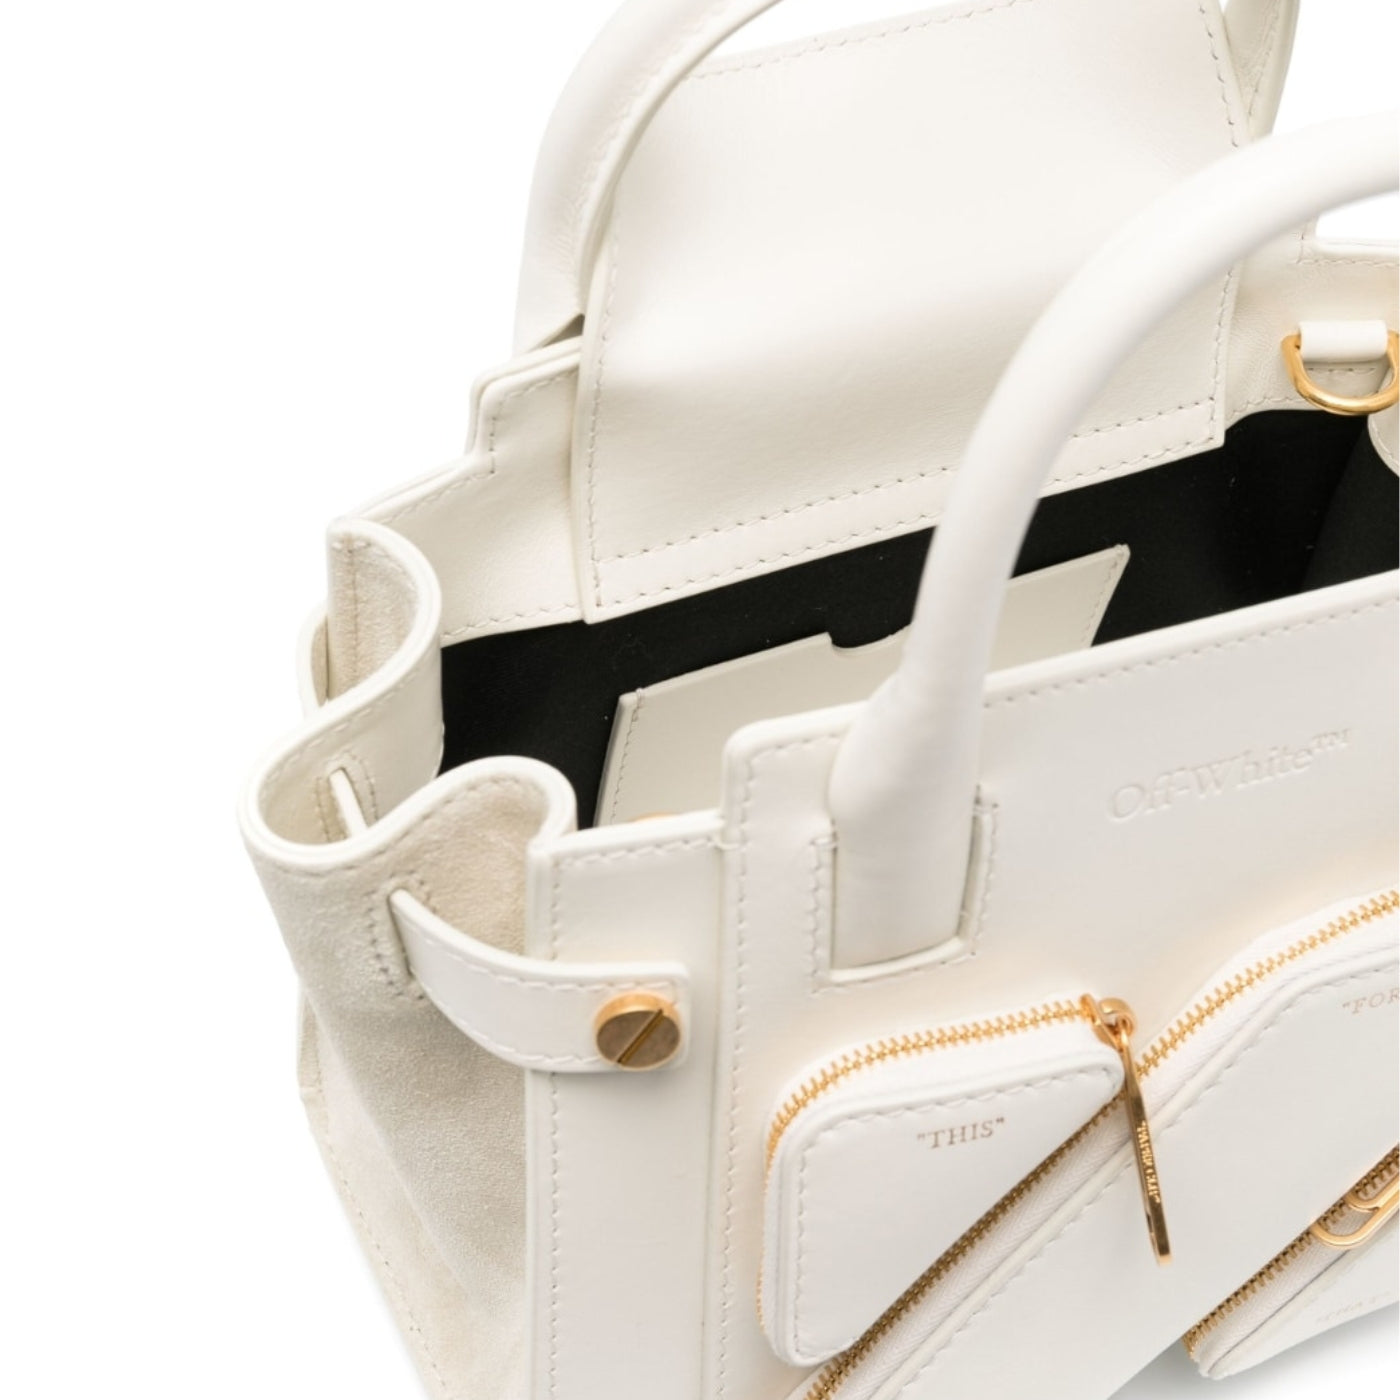 City Tote Small Top Handle in White Handbags OFF WHITE - LOLAMIR